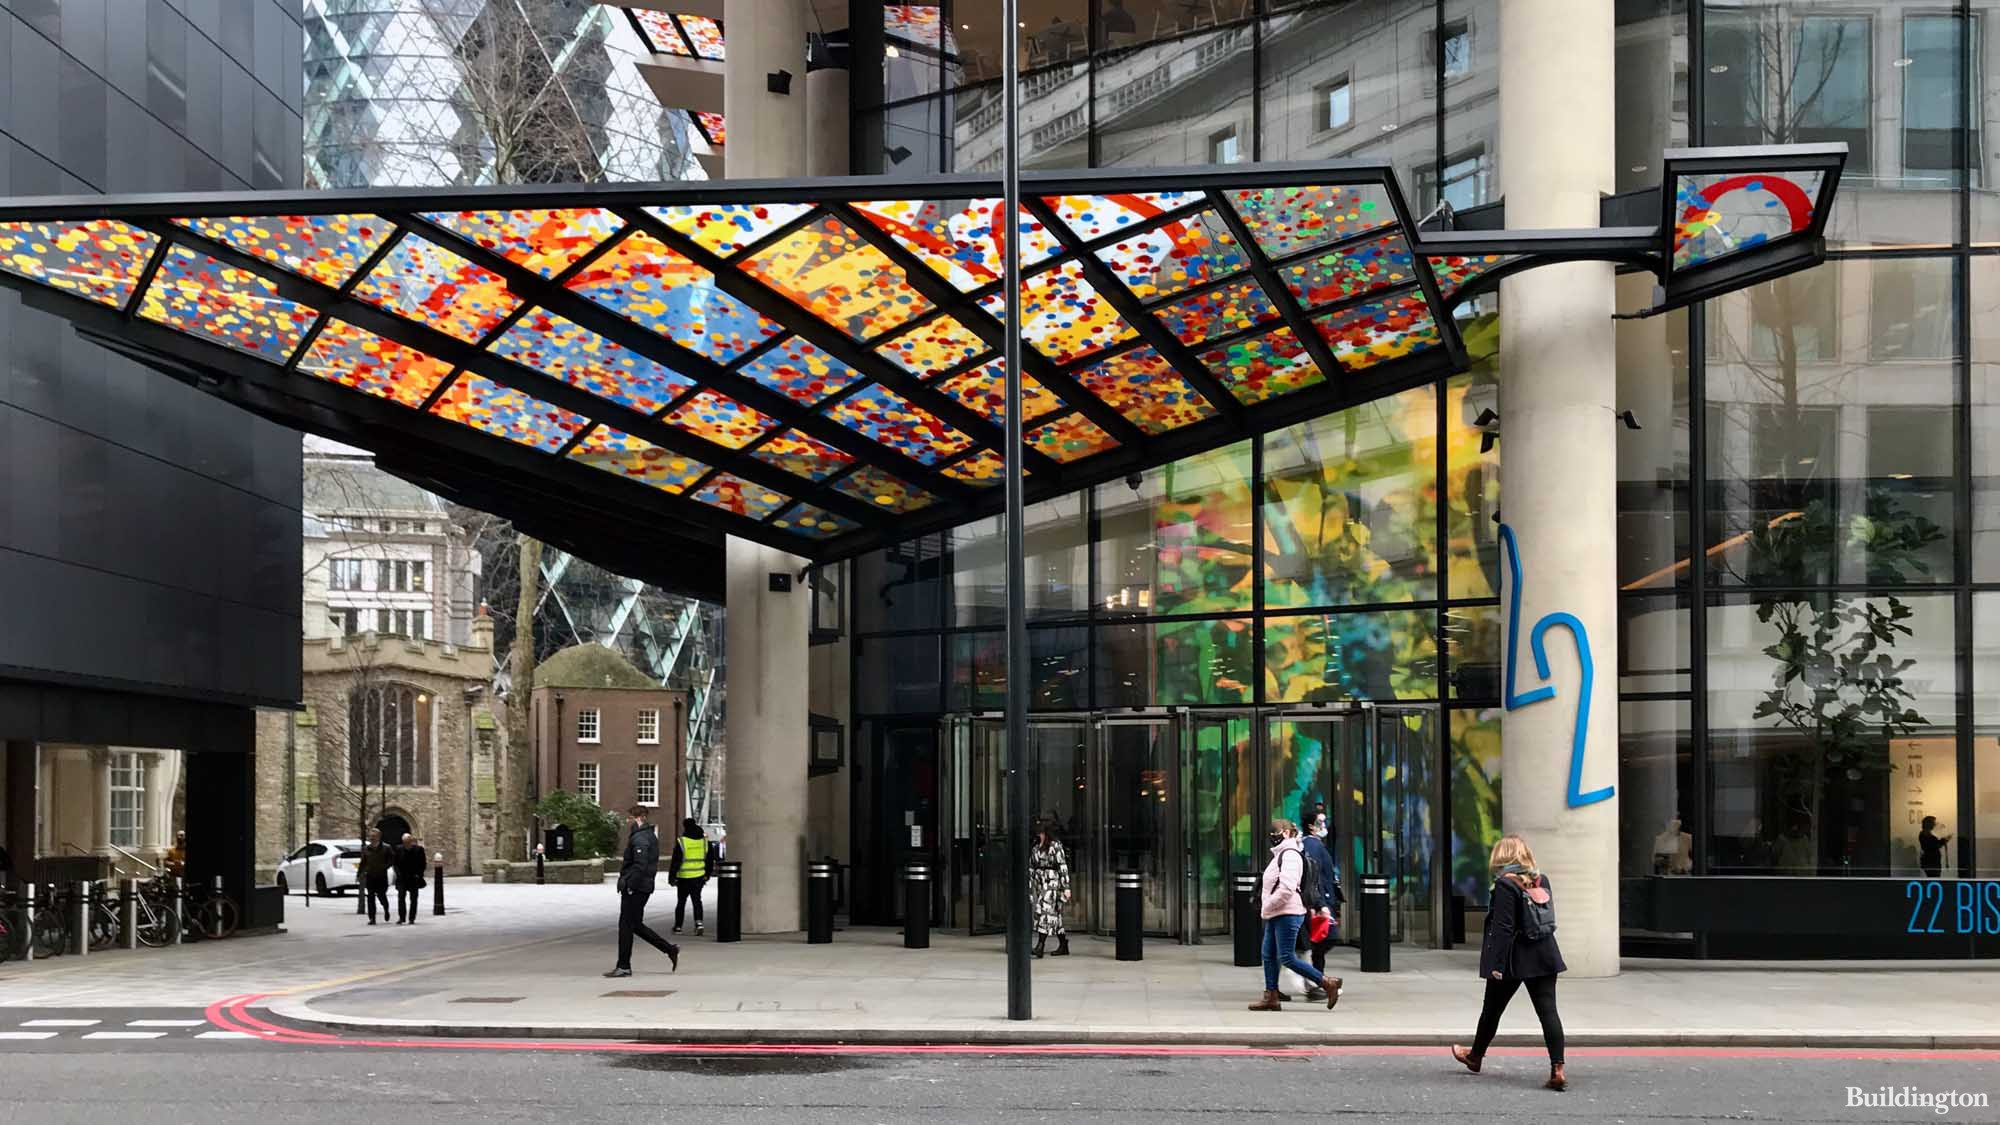 22 Bishopsgate building entrance on Bishopsgate in the City of London EC3. Glass canopies with artwork by Alexander Beleschenko.